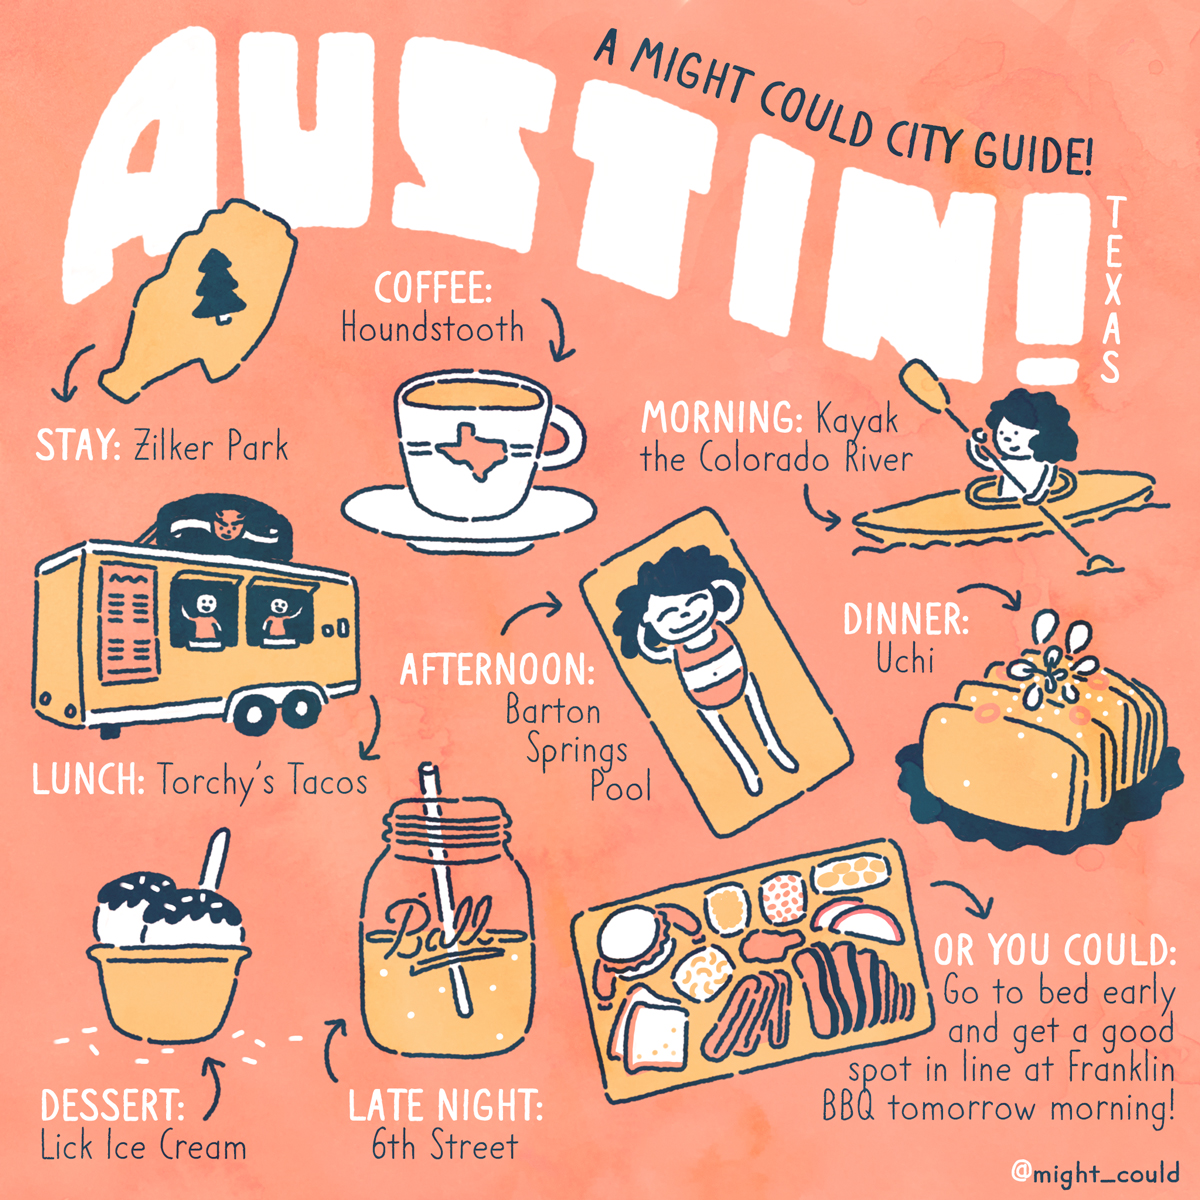 Illustrated City Guide: Austin!